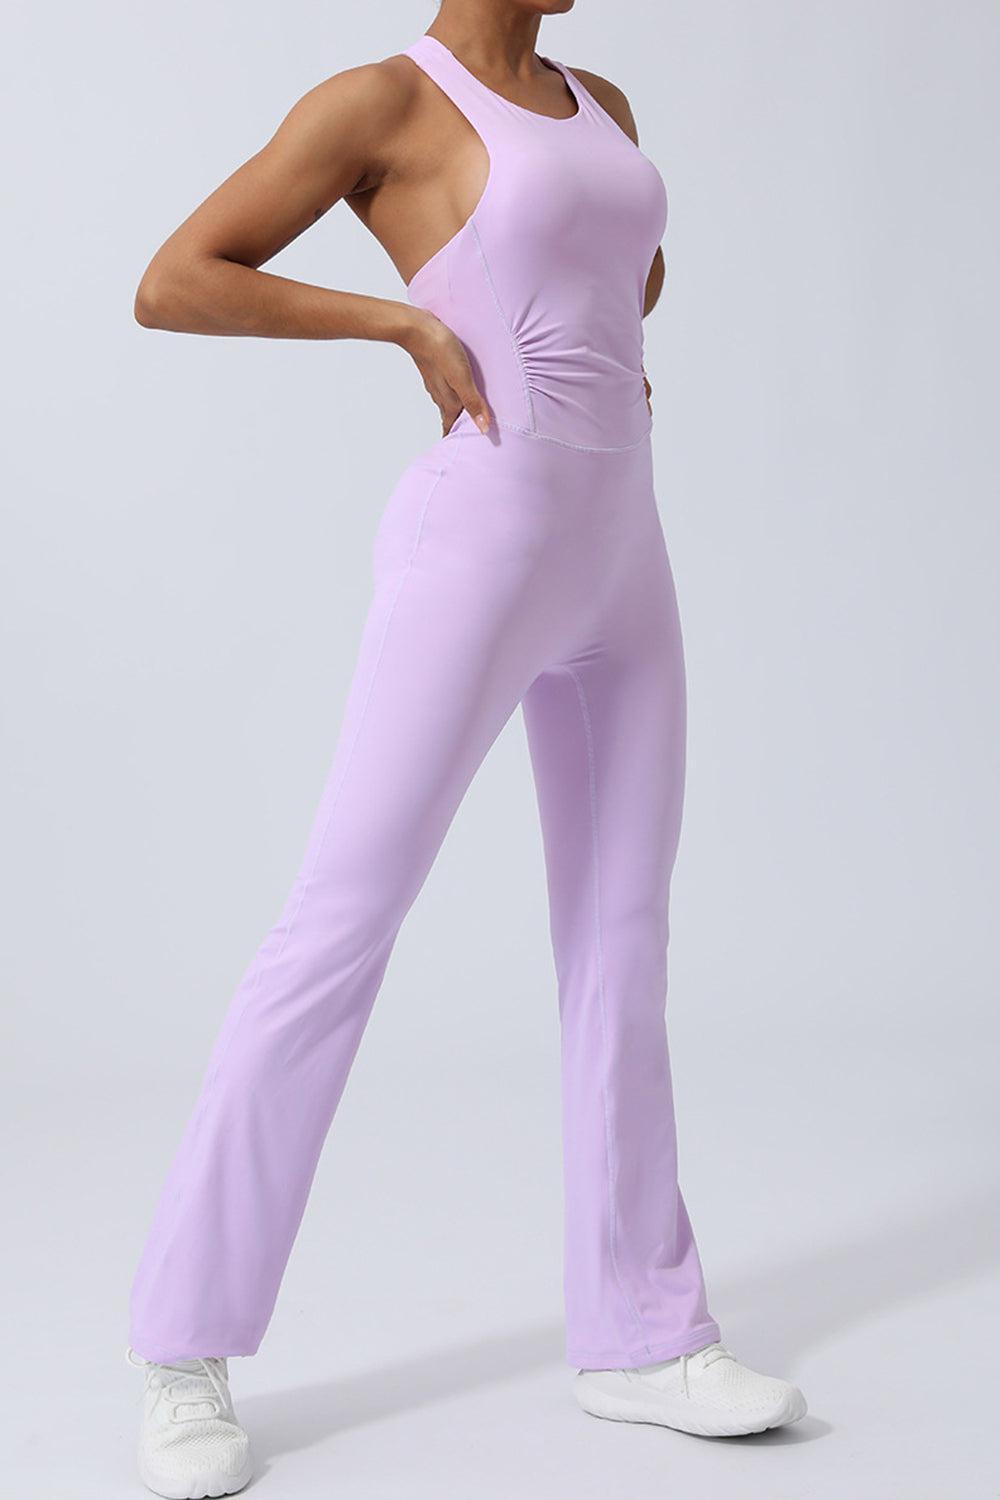 a woman in a purple jumpsuit posing for a picture